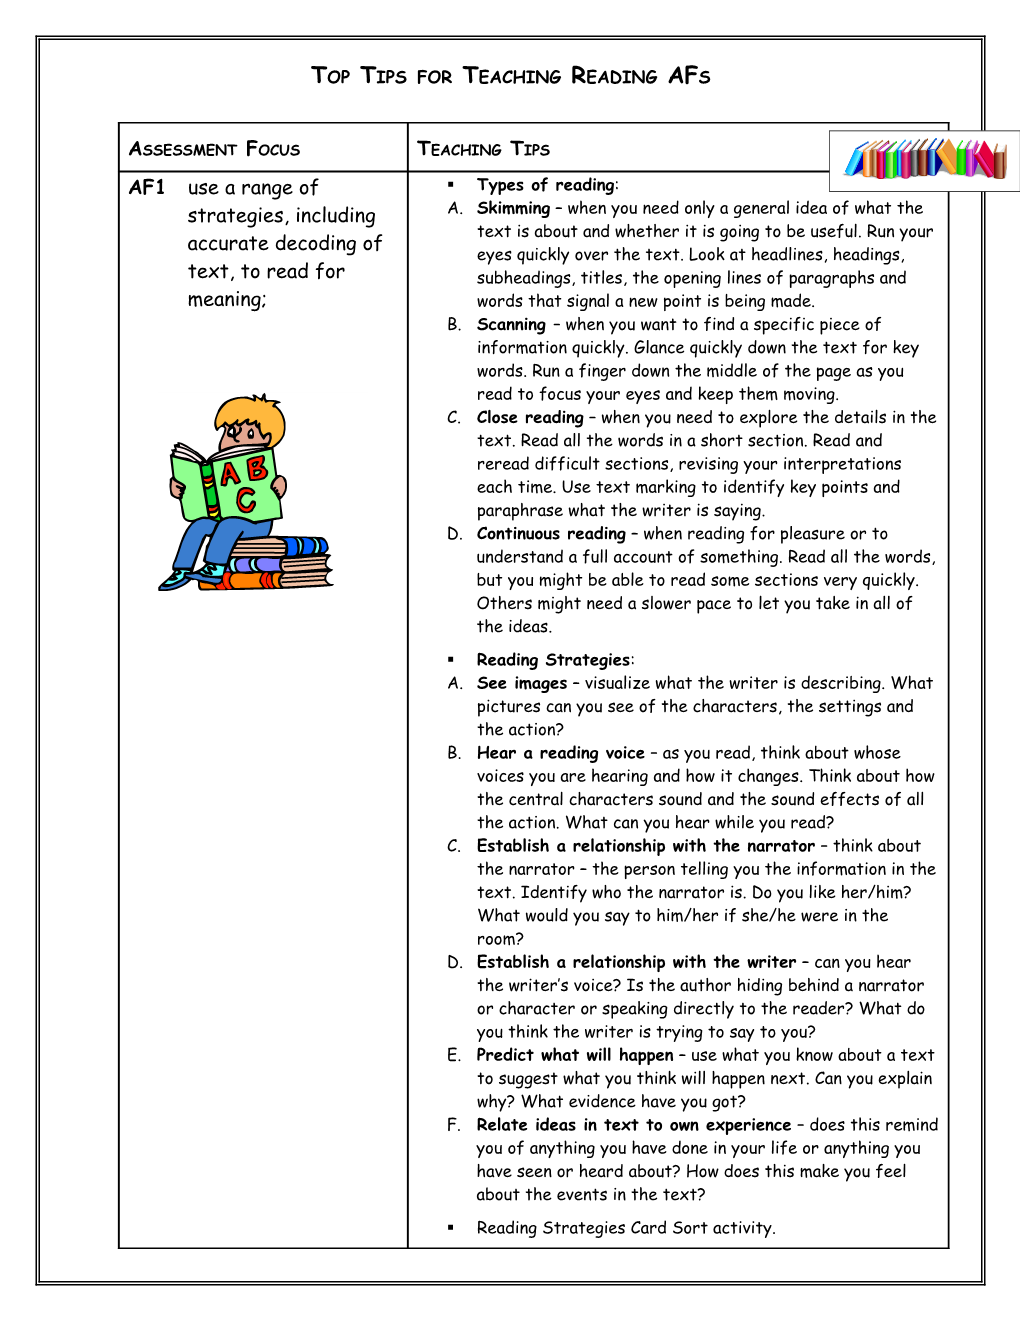 Reading Assessment Focuses - Top Tips for Teaching Reading Afs